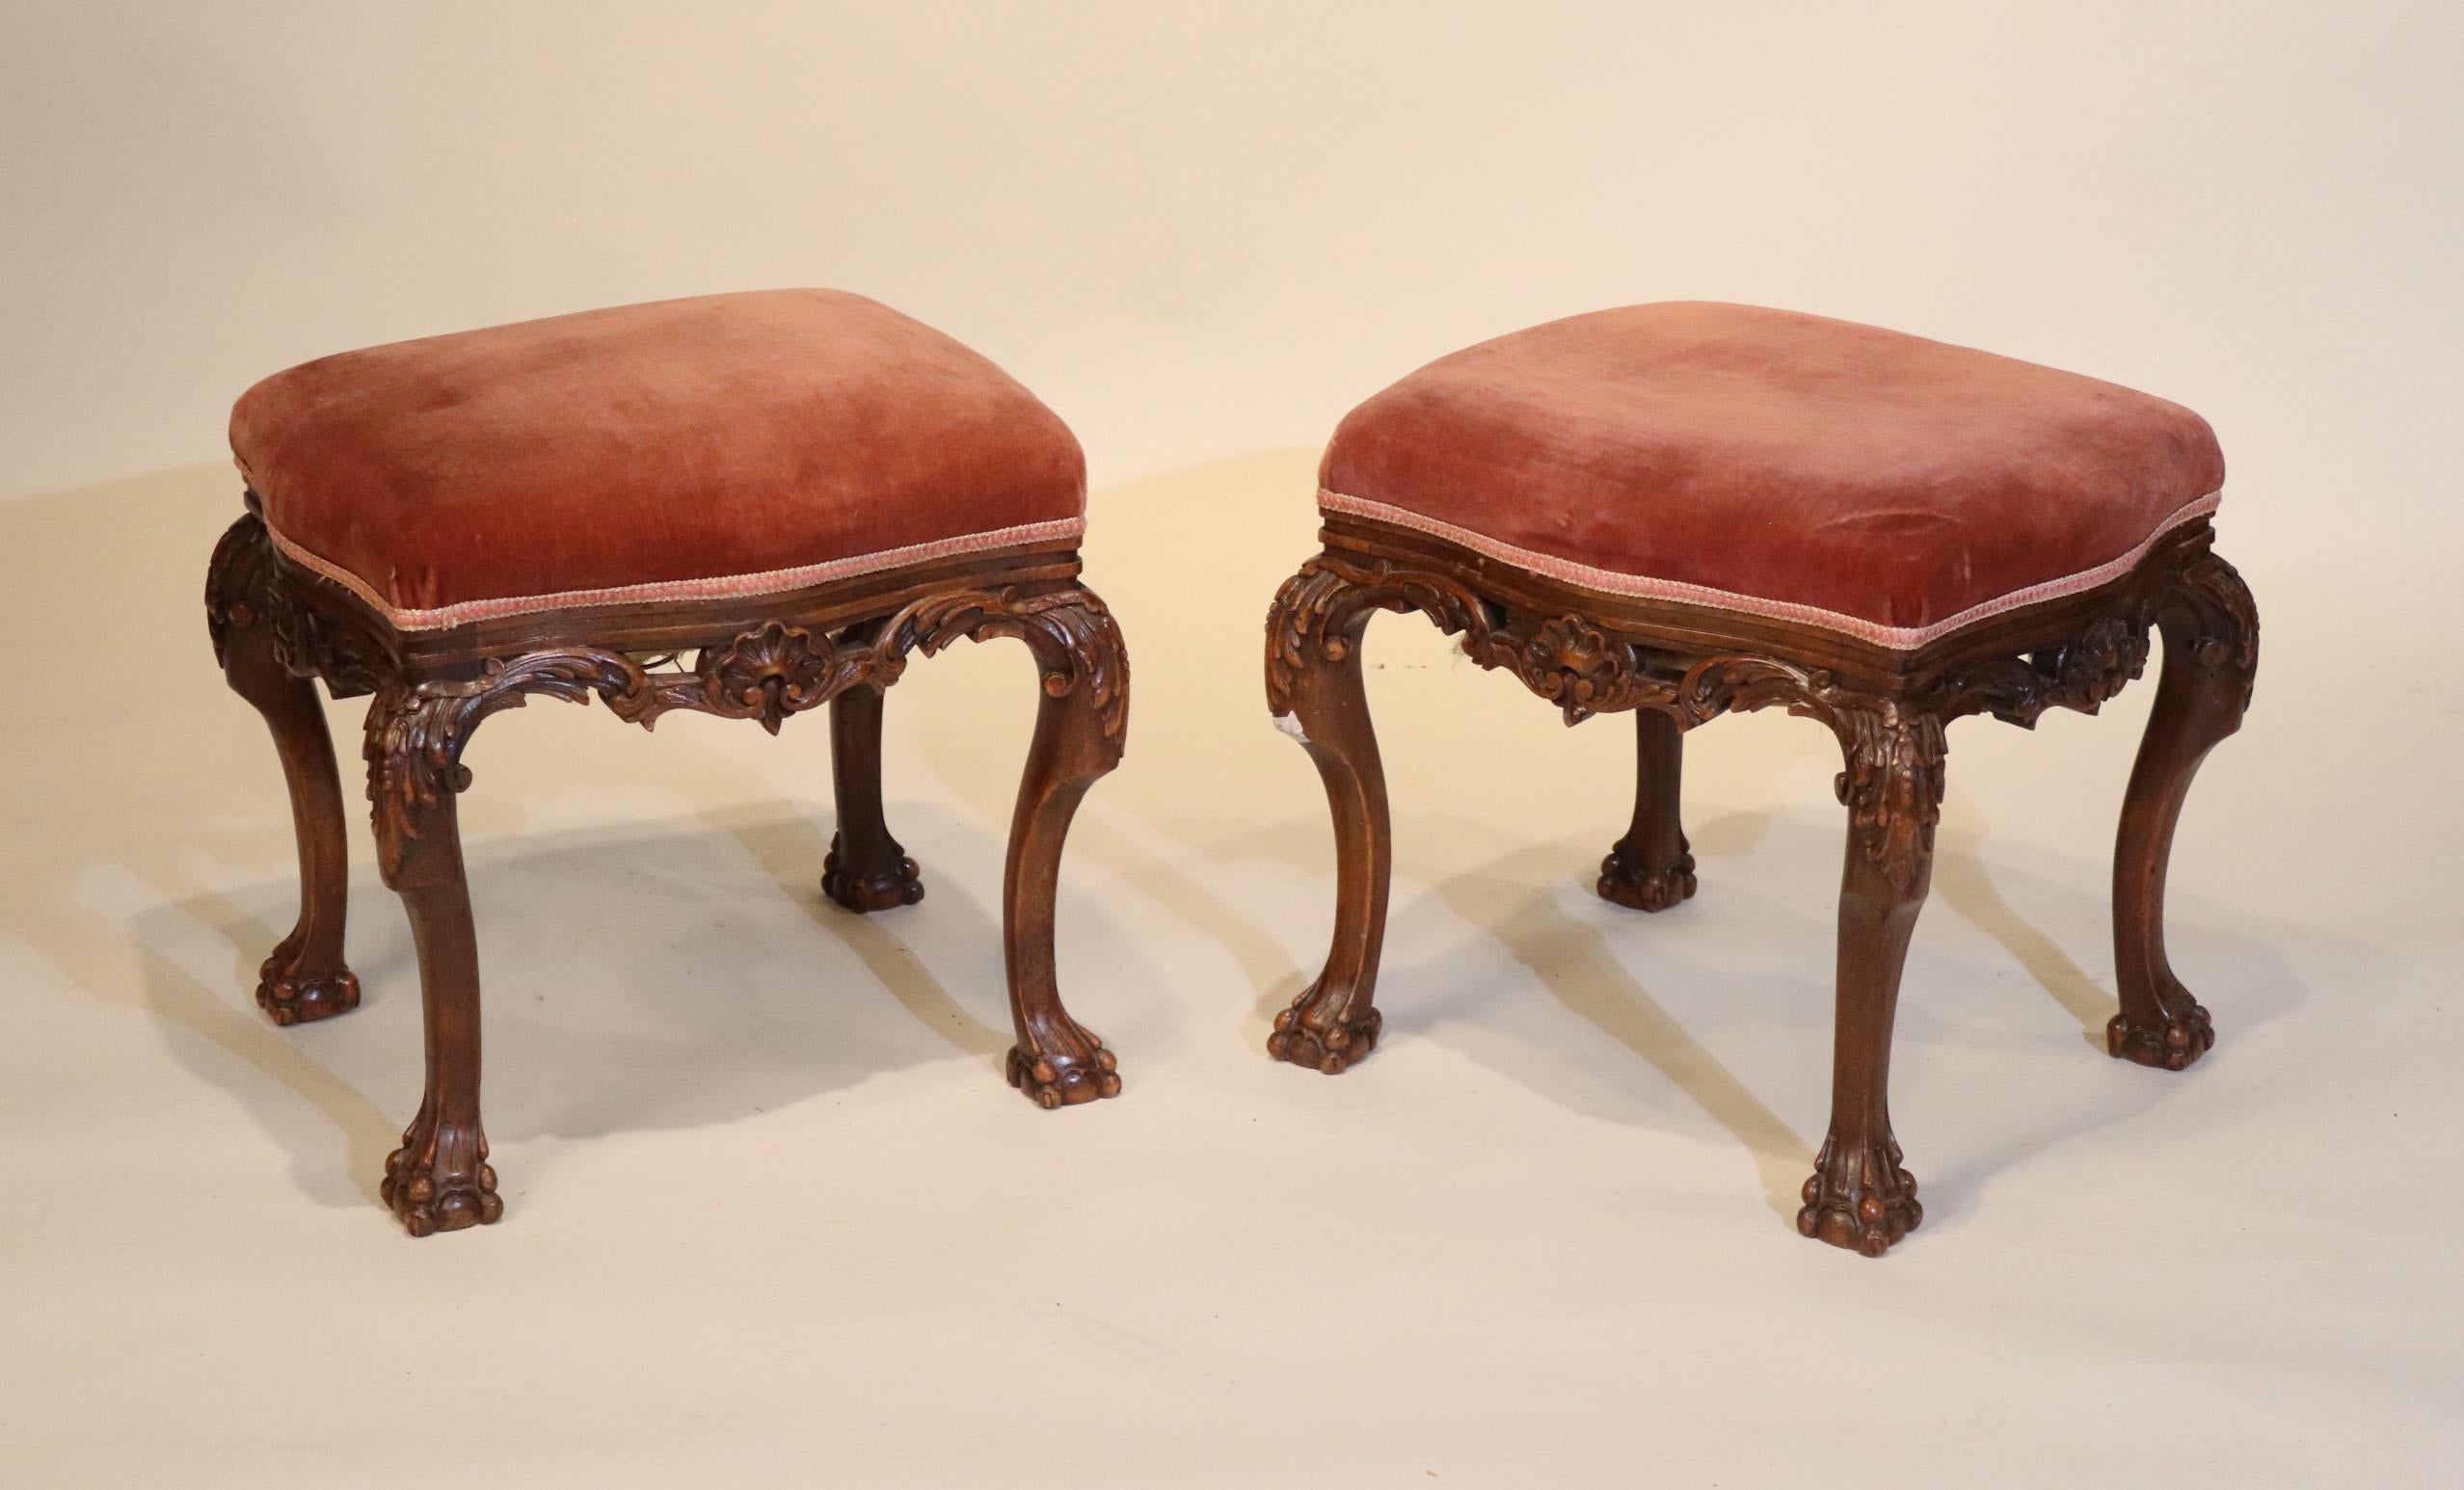 Baroque Beautiful Pair of 19th Century Portuguese Mahogany Carved Benches For Sale